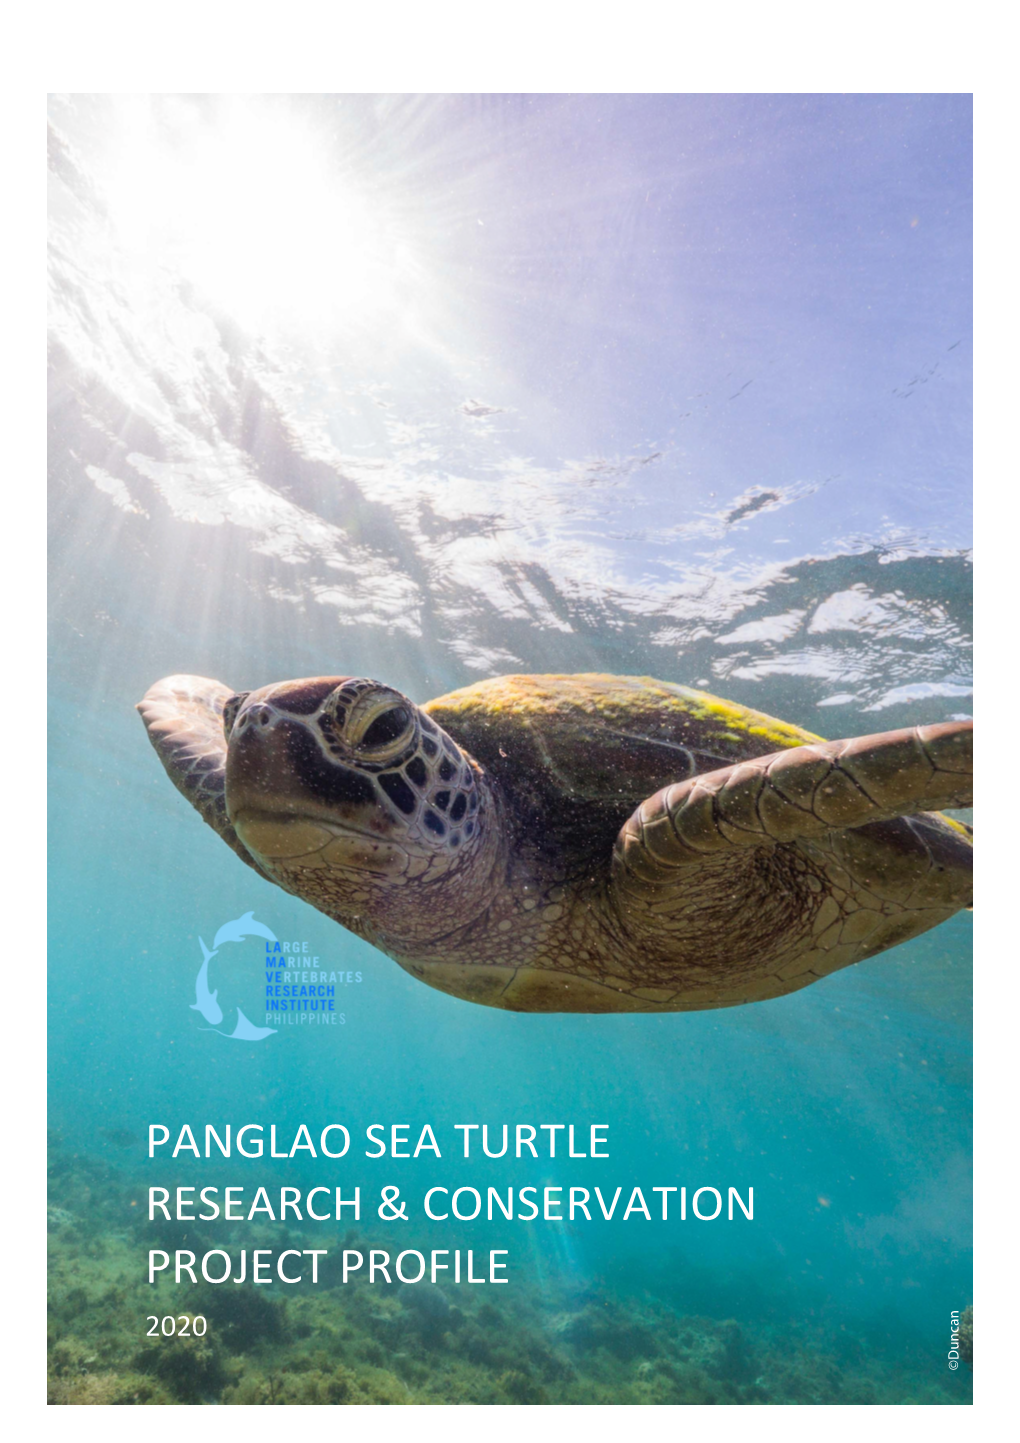 Panglao Sea Turtle Research & Conservation Project